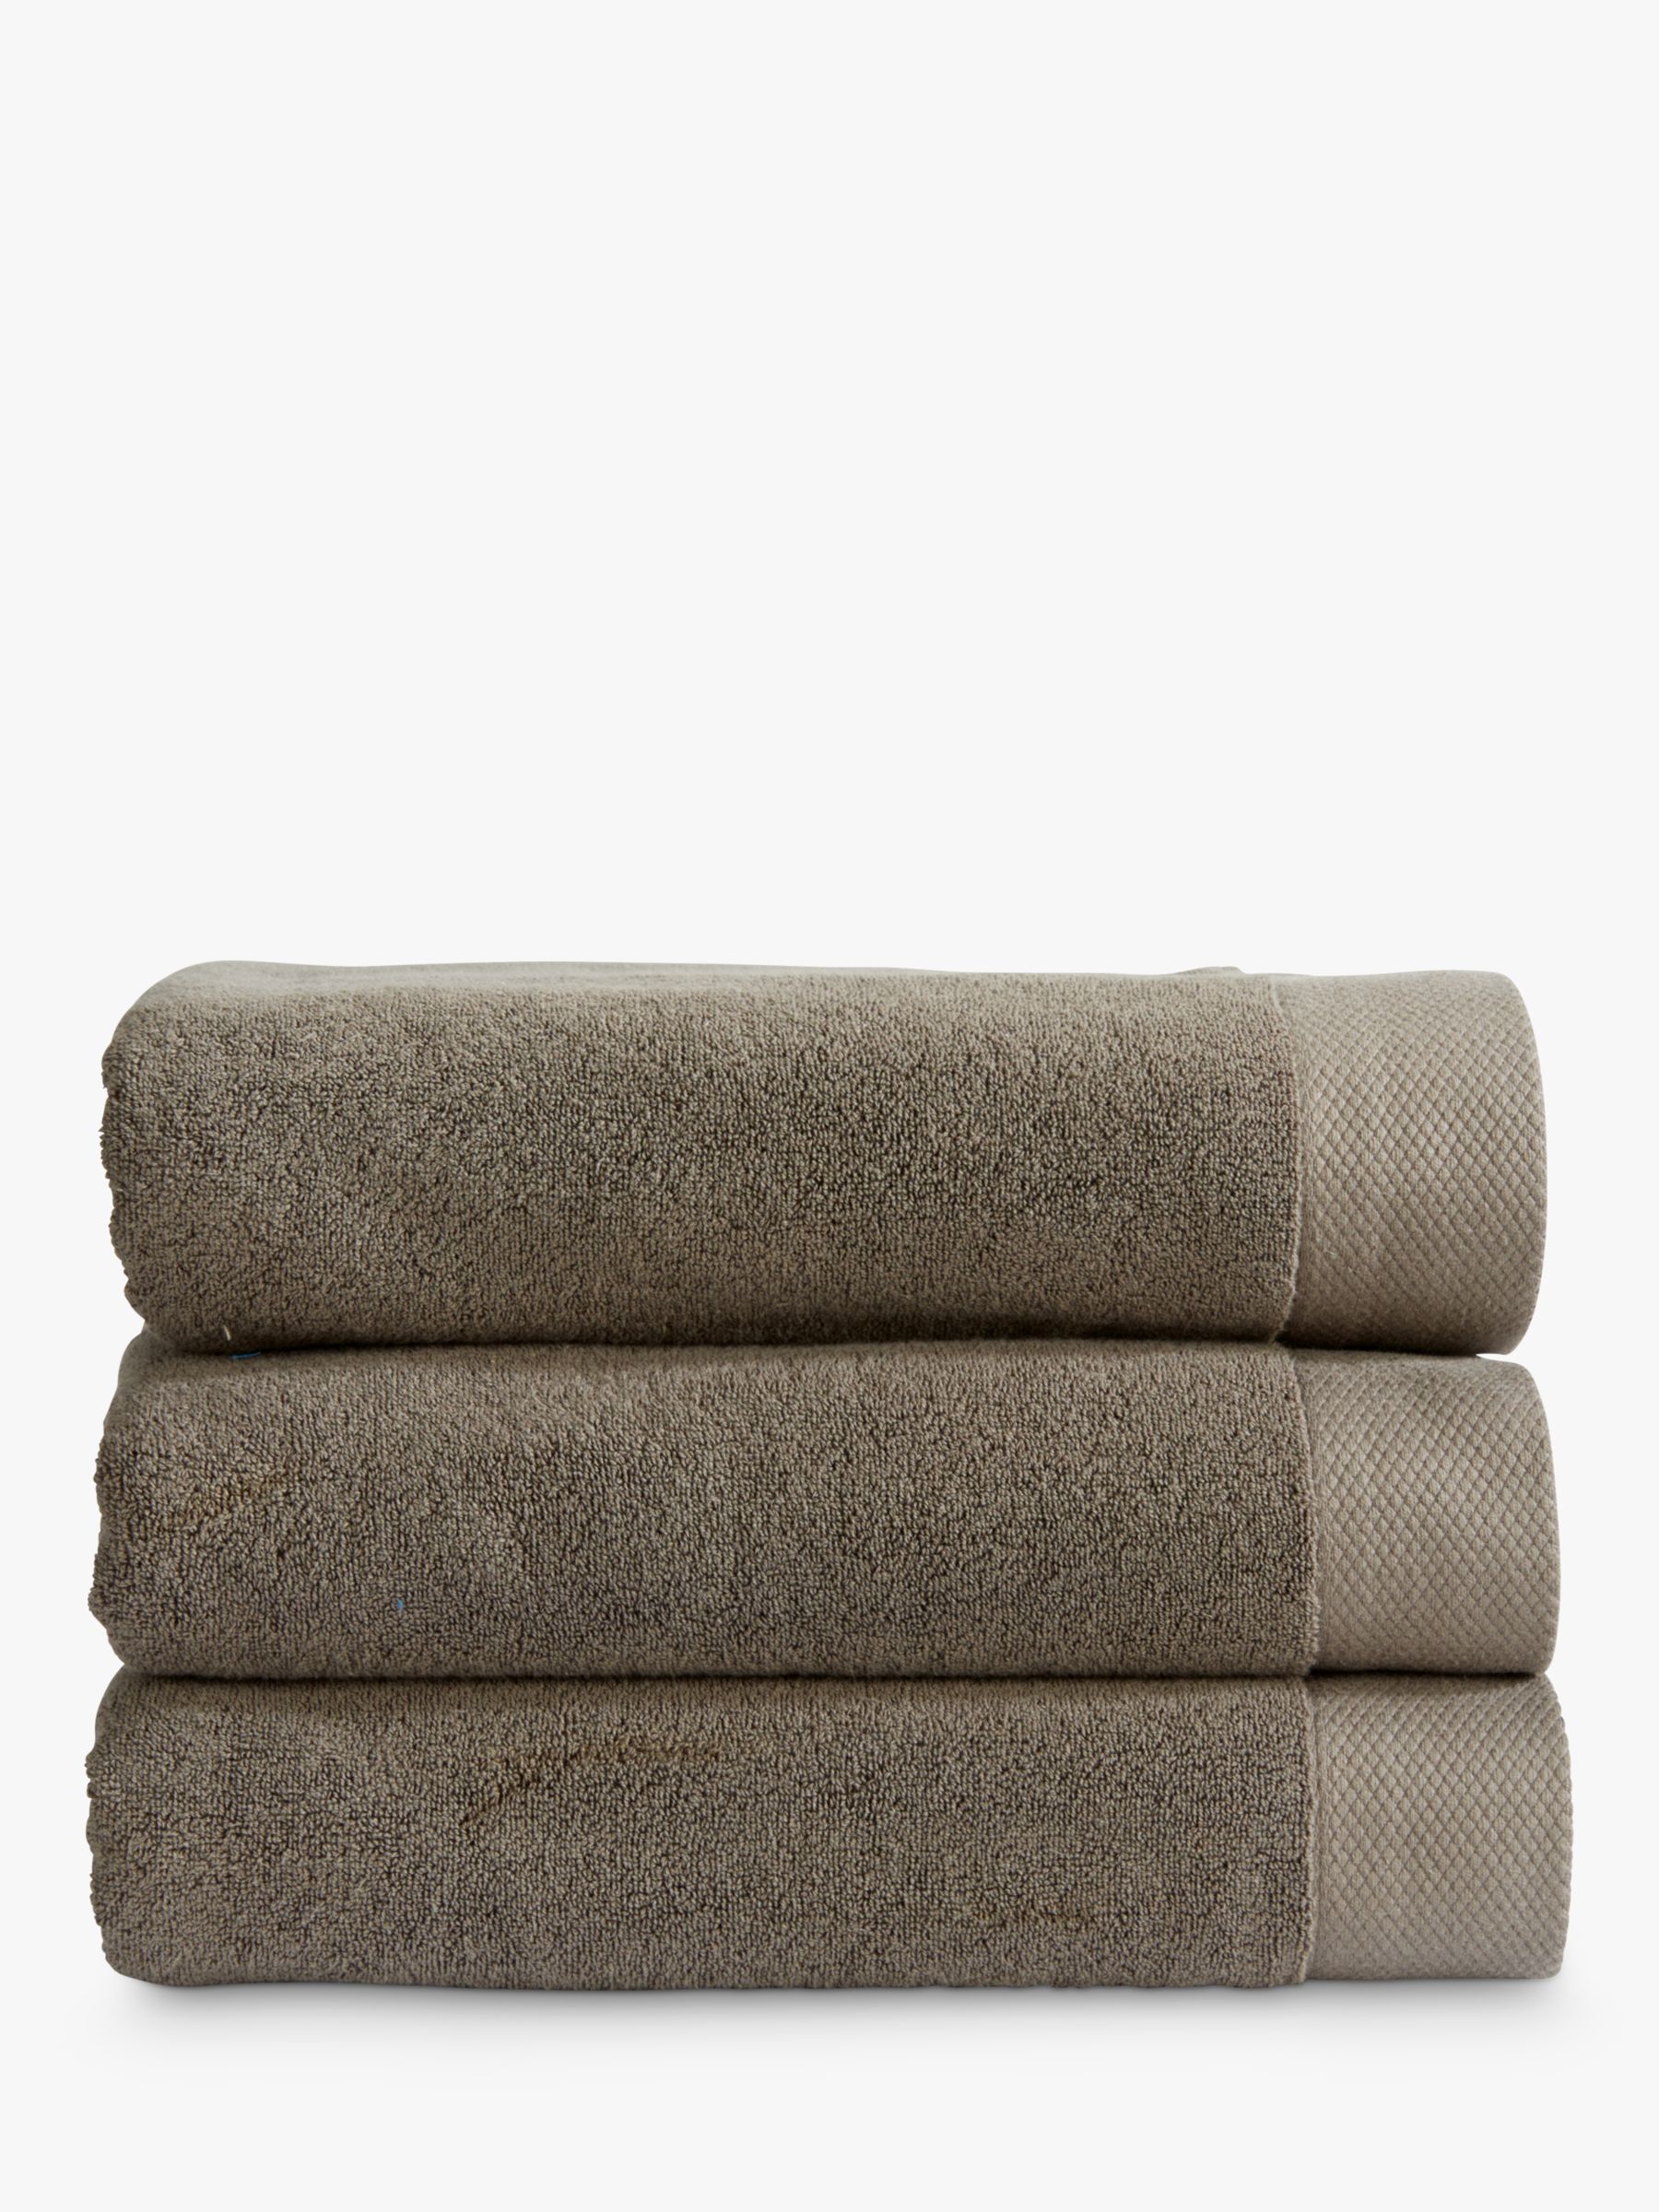 Christy Luxe Turkish Cotton Towels, Soot